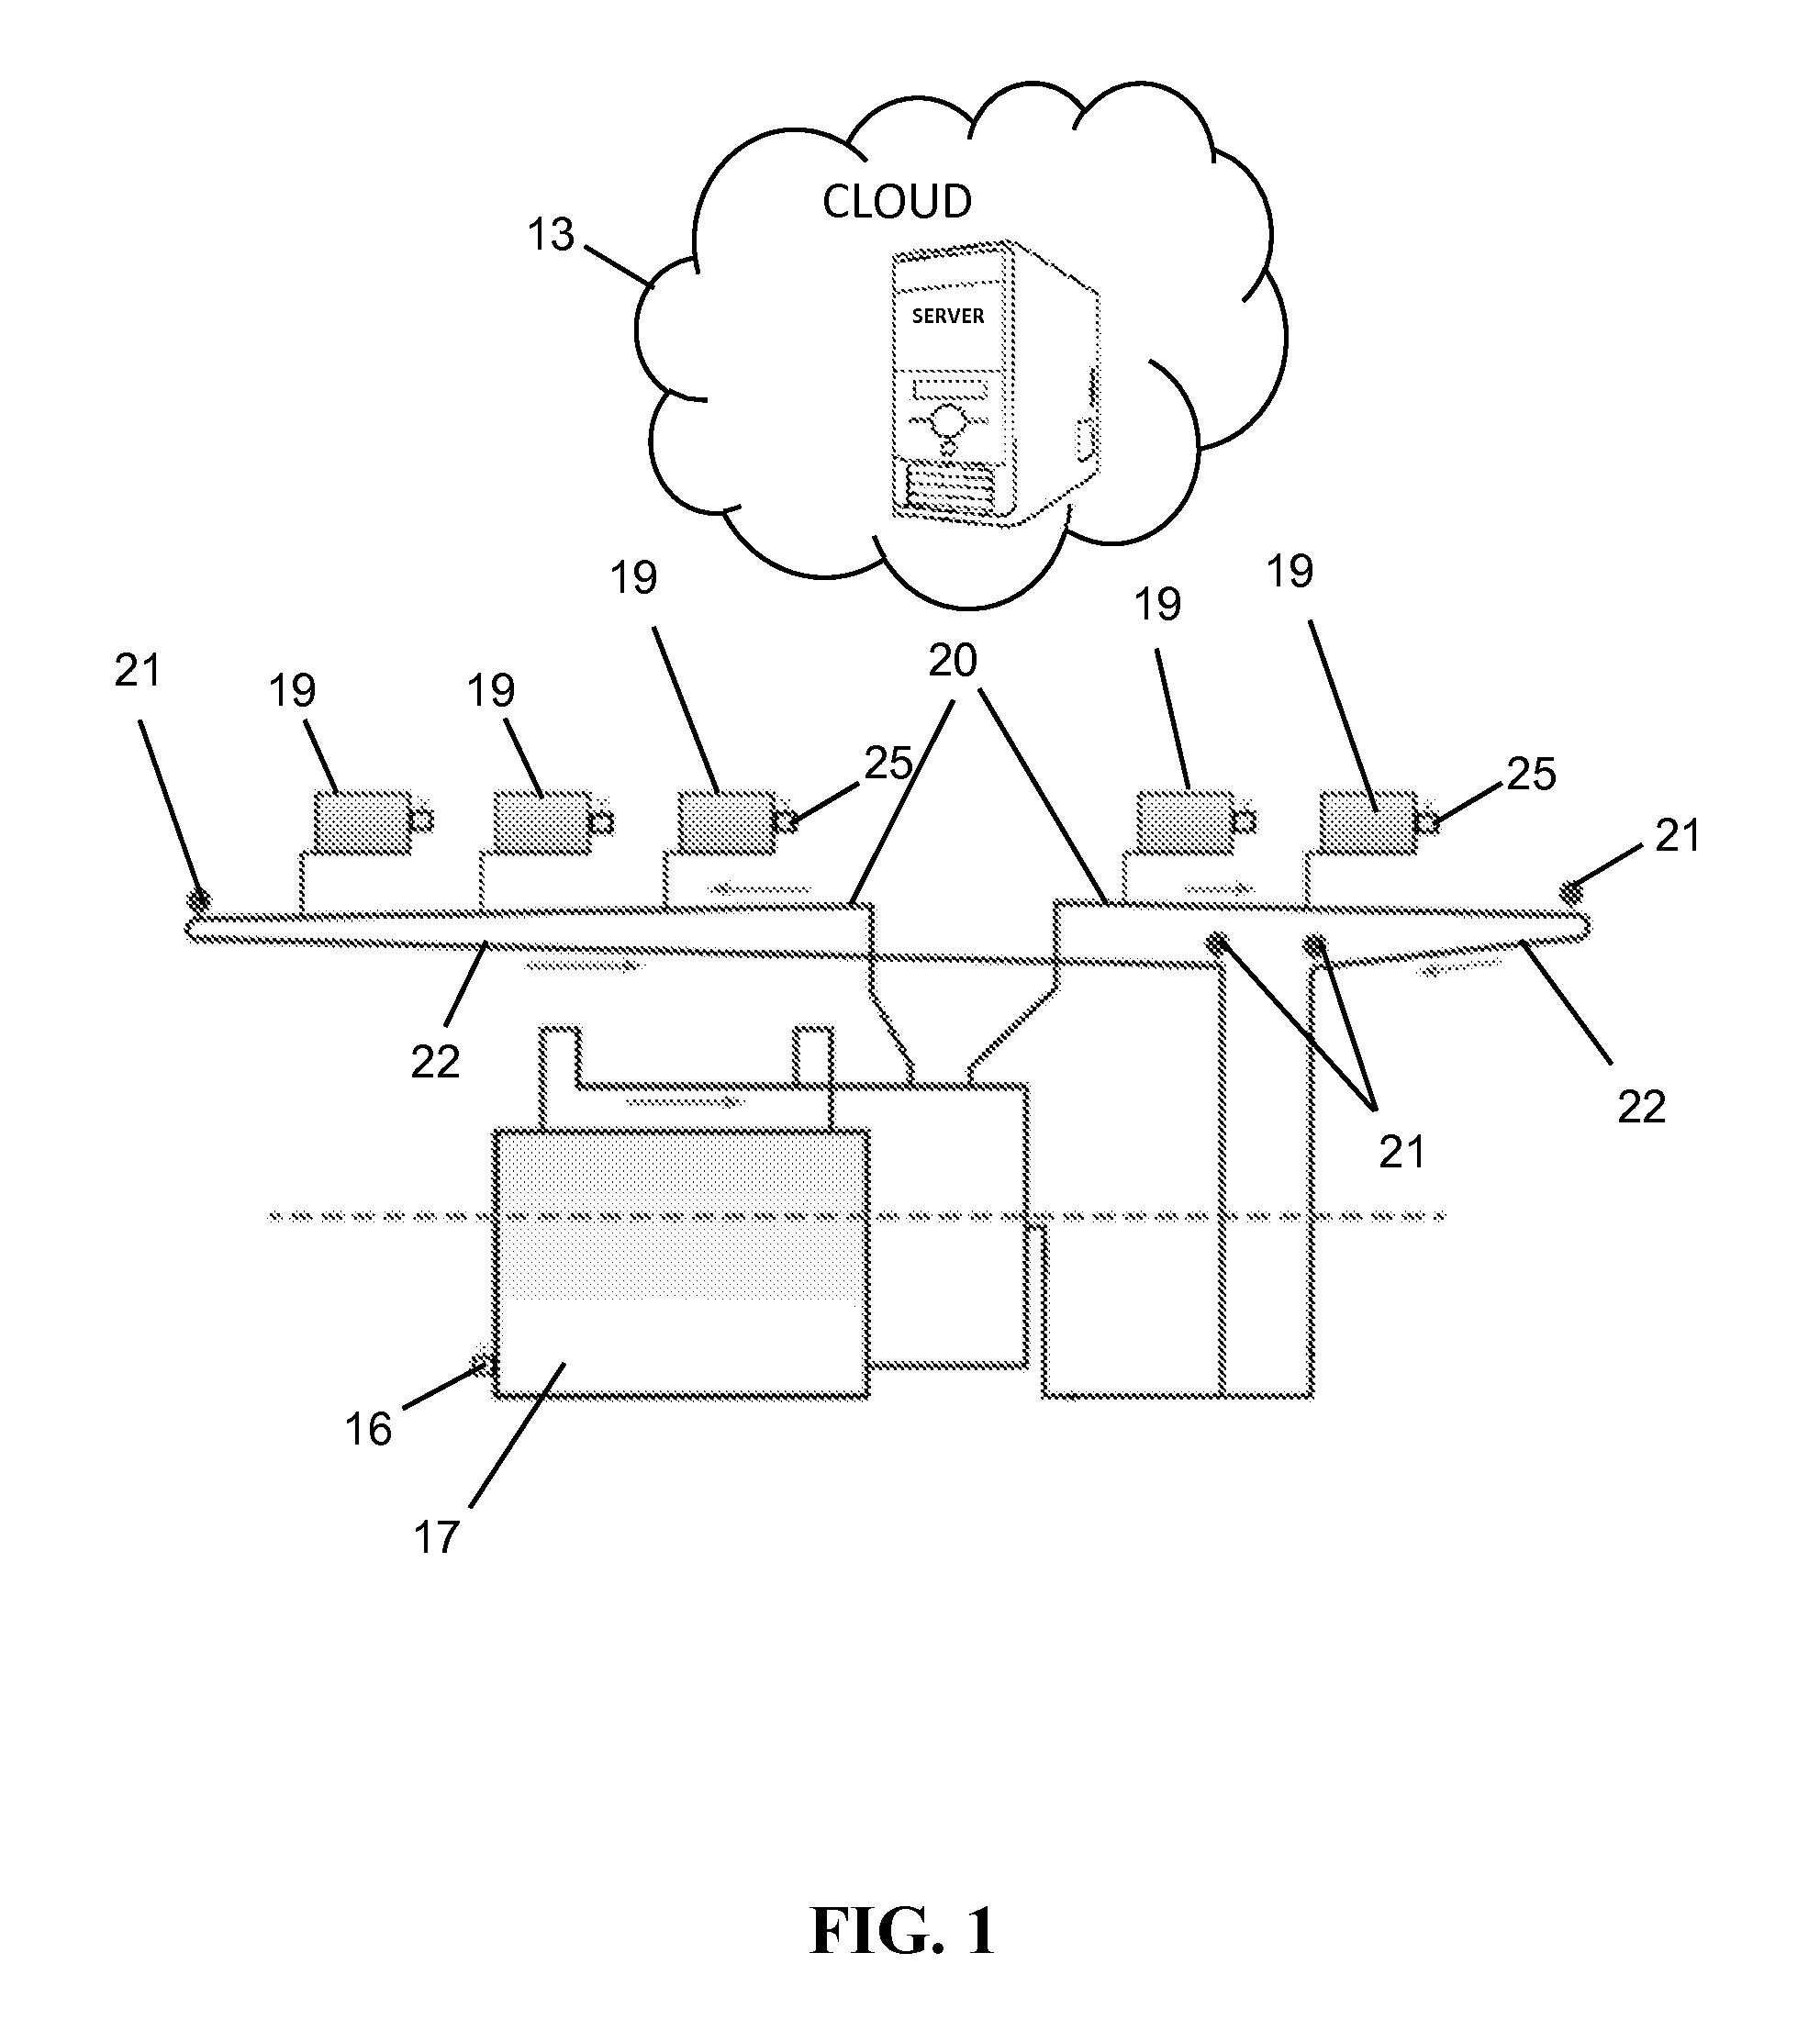 Systems and methods for controlling conditioned fluid systems in a built environment